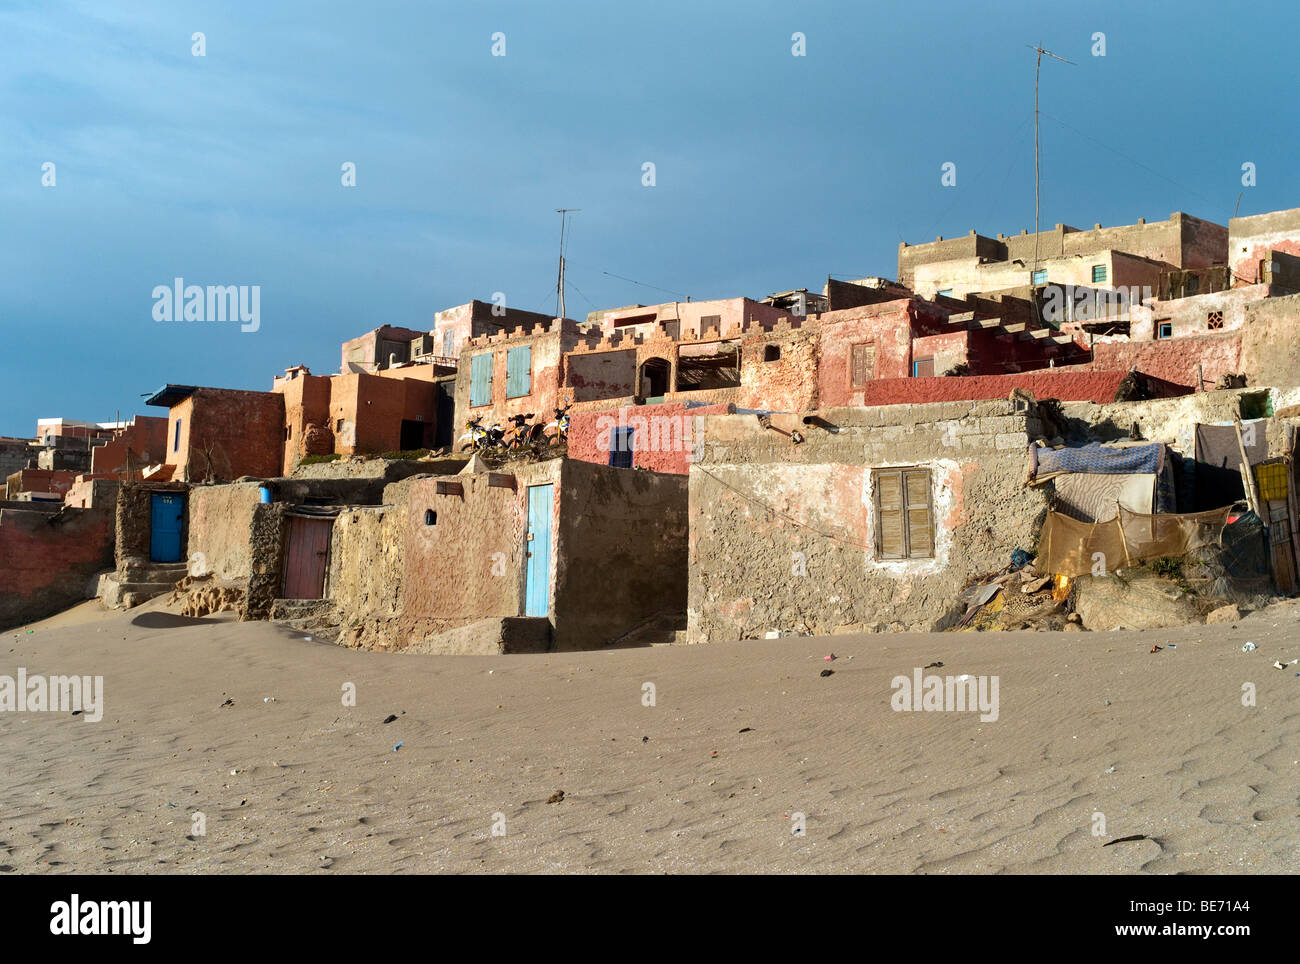 Lonely fishing village DOURIYA as a tourist attraction in the Massa National Park, Souss-Massa-Drâa, Morocco, Africa Stock Photo